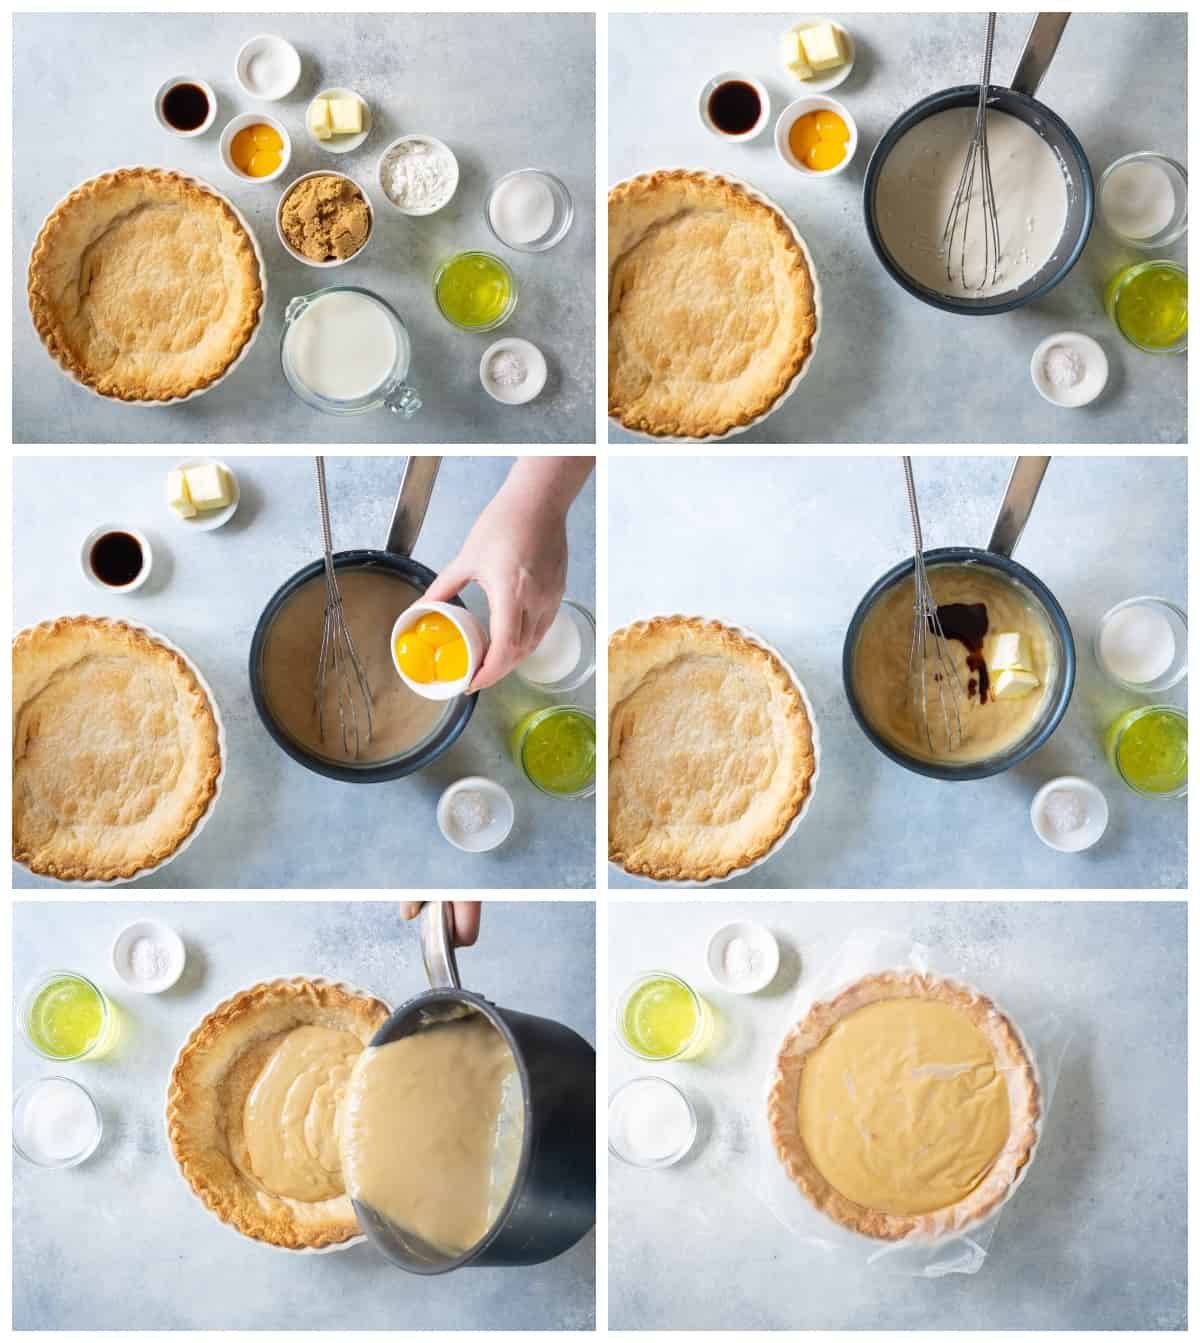 how to make butterscotch pie step by step photo instructions